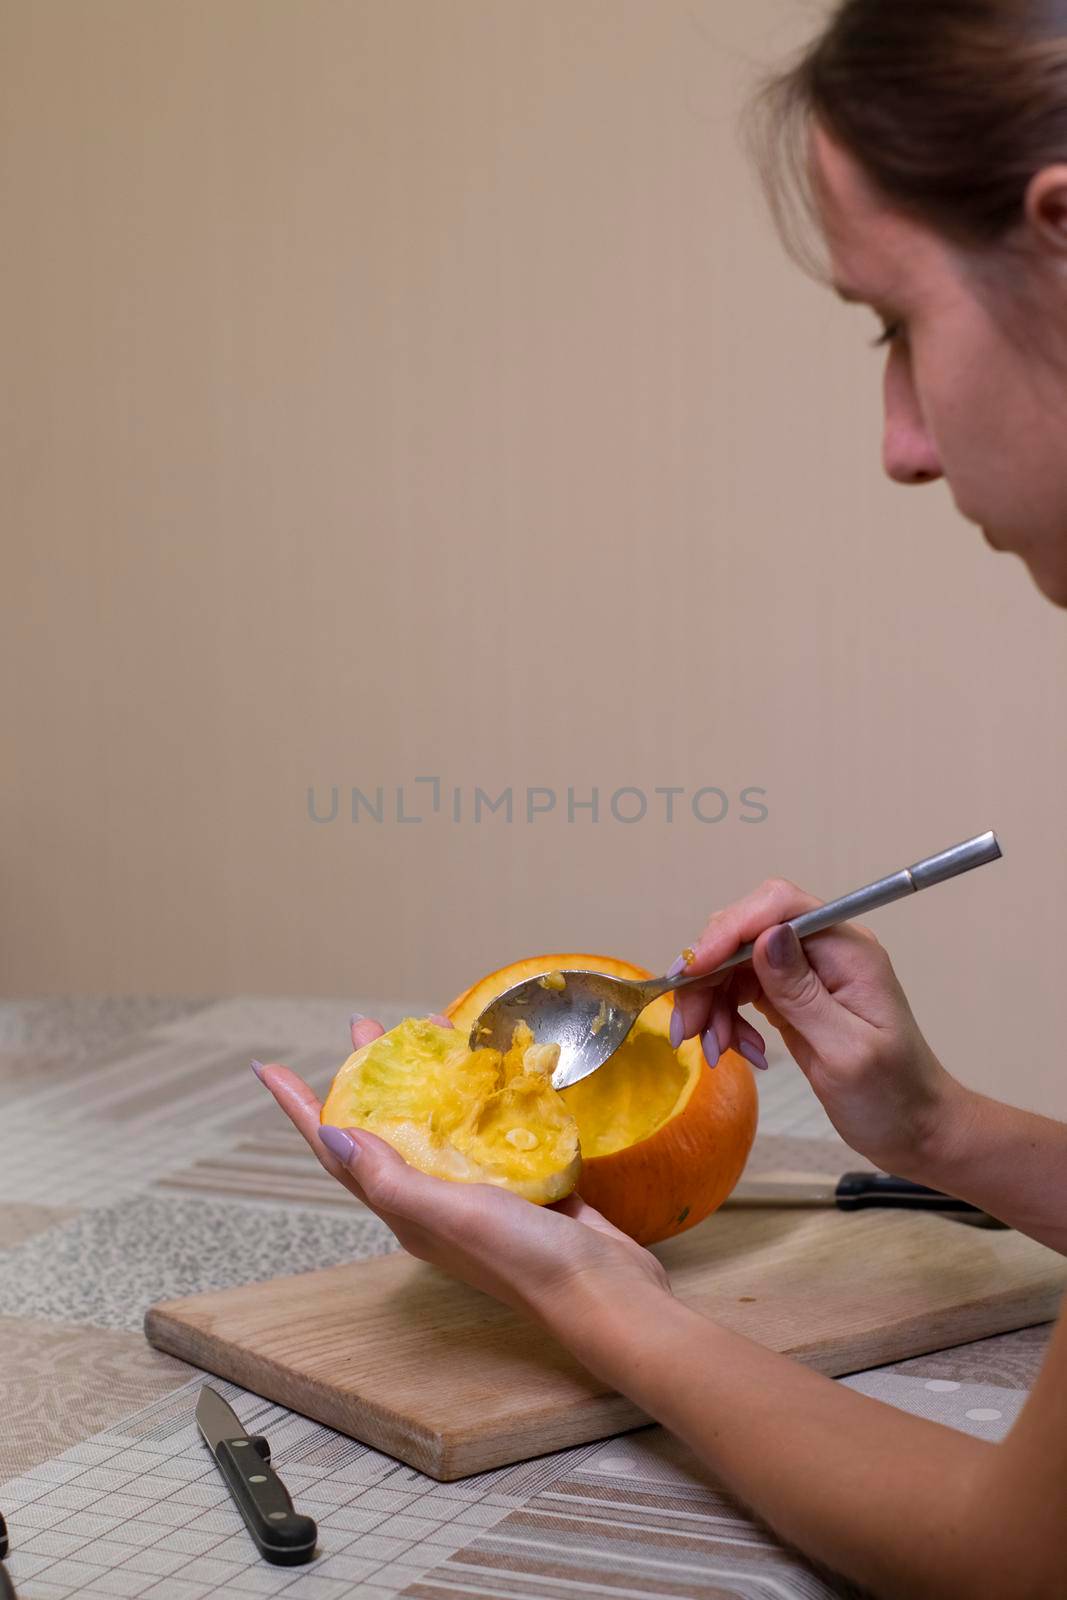 the process of making a Halloween pumpkin. cleansing of seeds. horror theme and Hallowe'en.